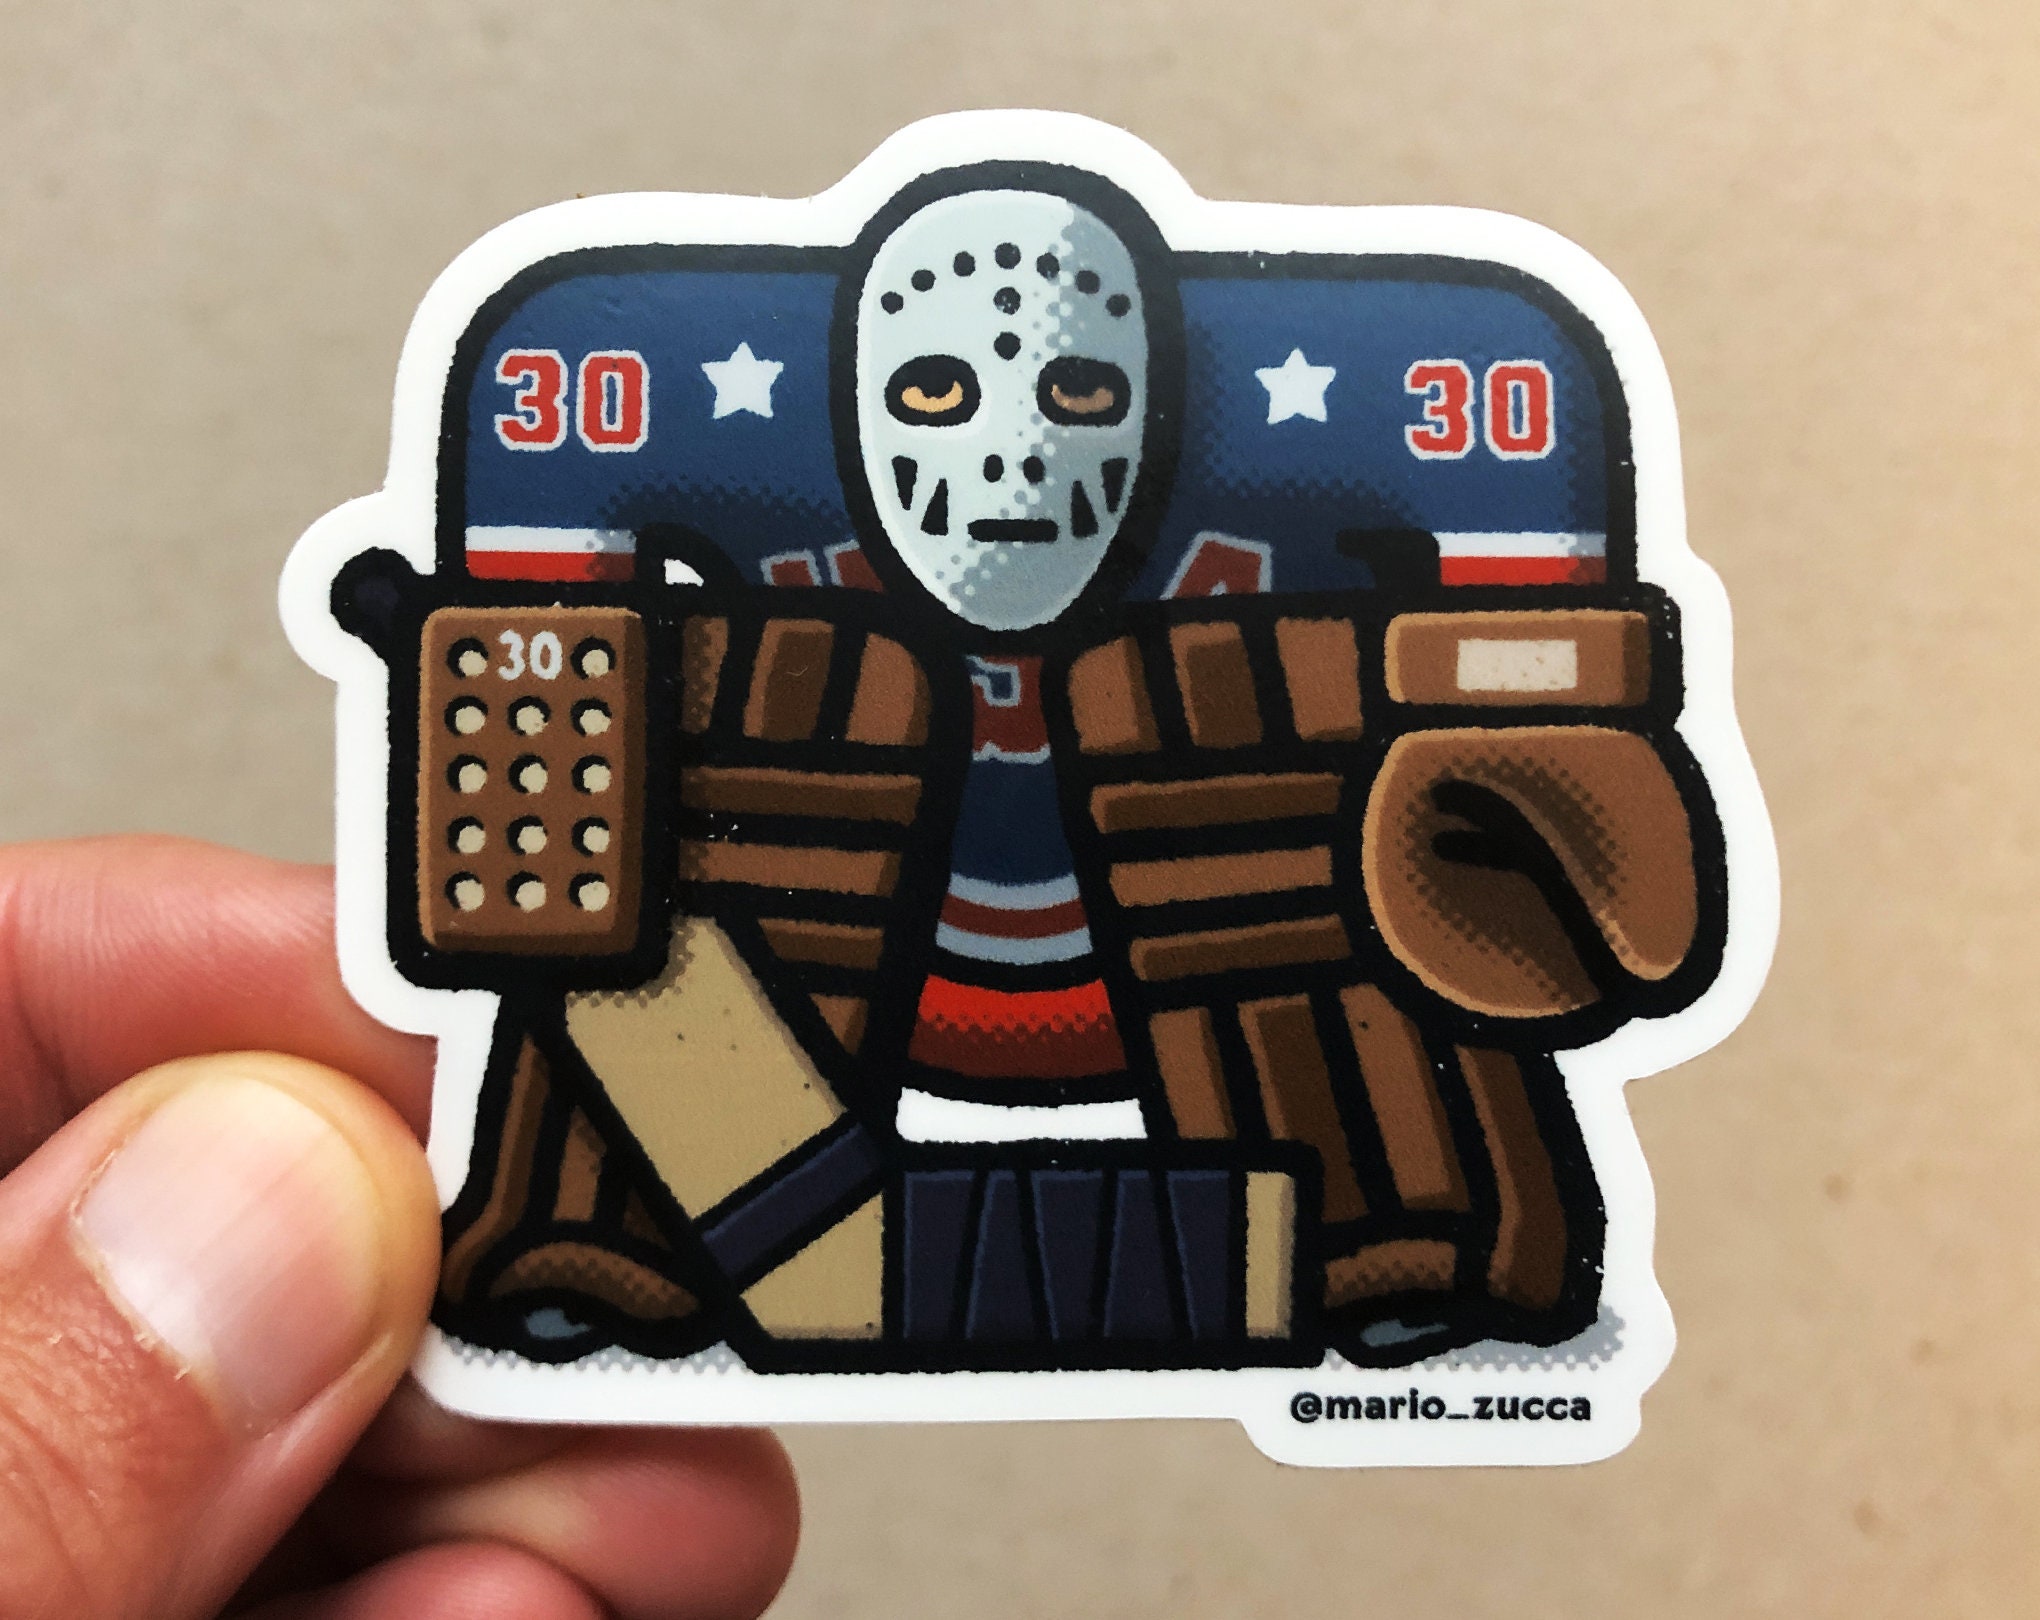 Jim Craig - Miracle Sticker for Sale by msuckow